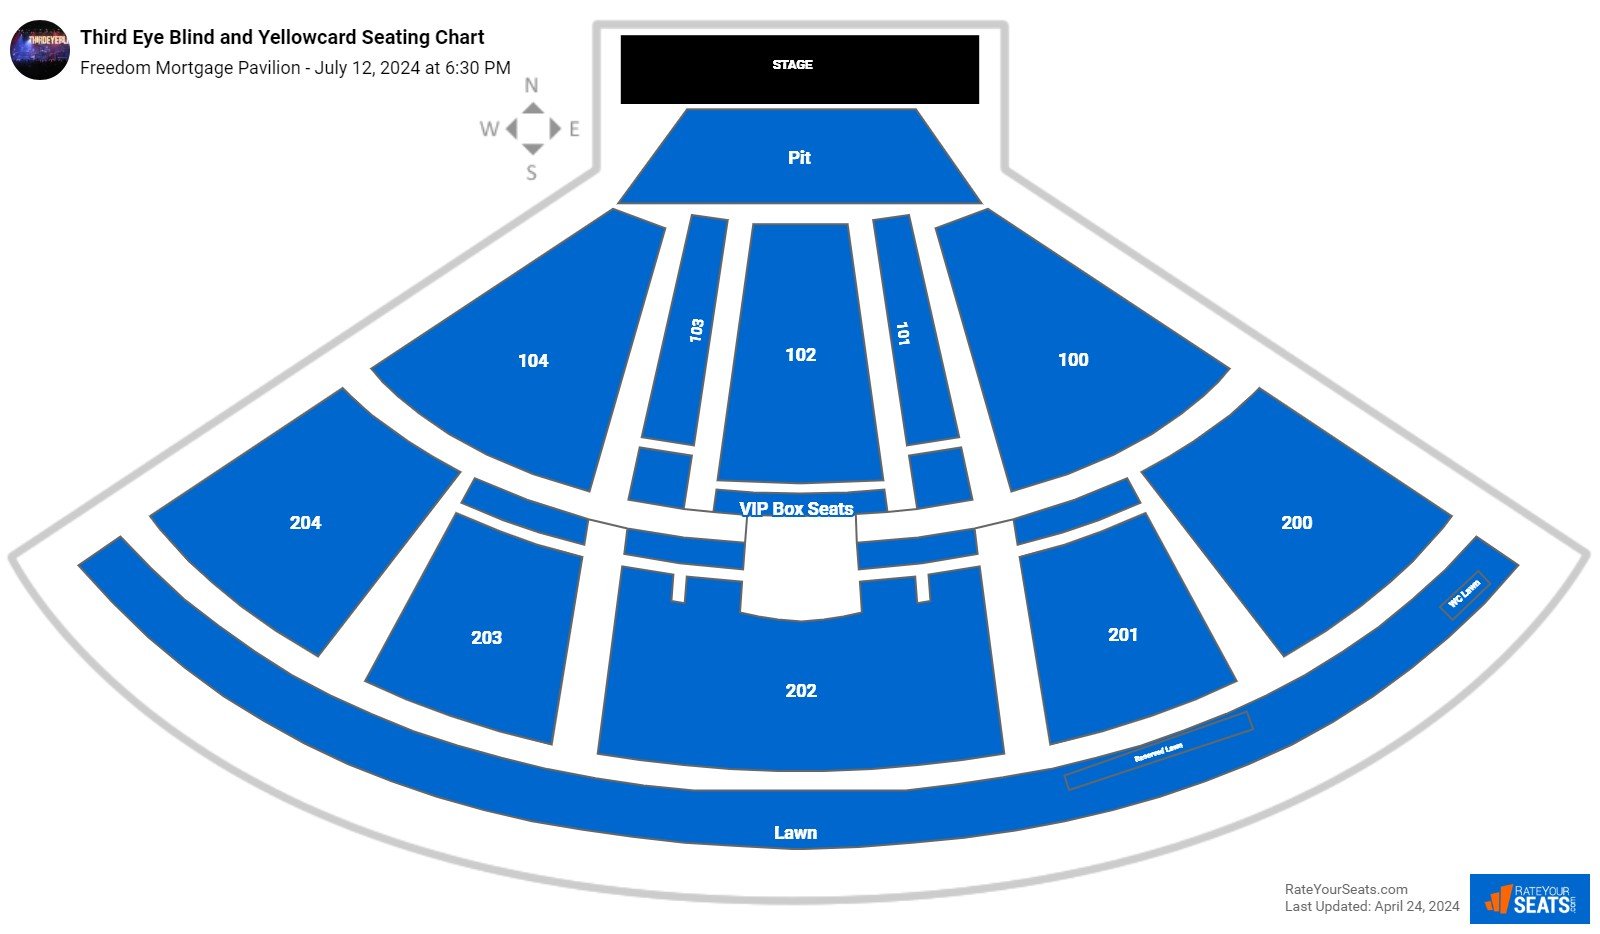 Third Eye Blind and Yellowcard seating chart Freedom Mortgage Pavilion